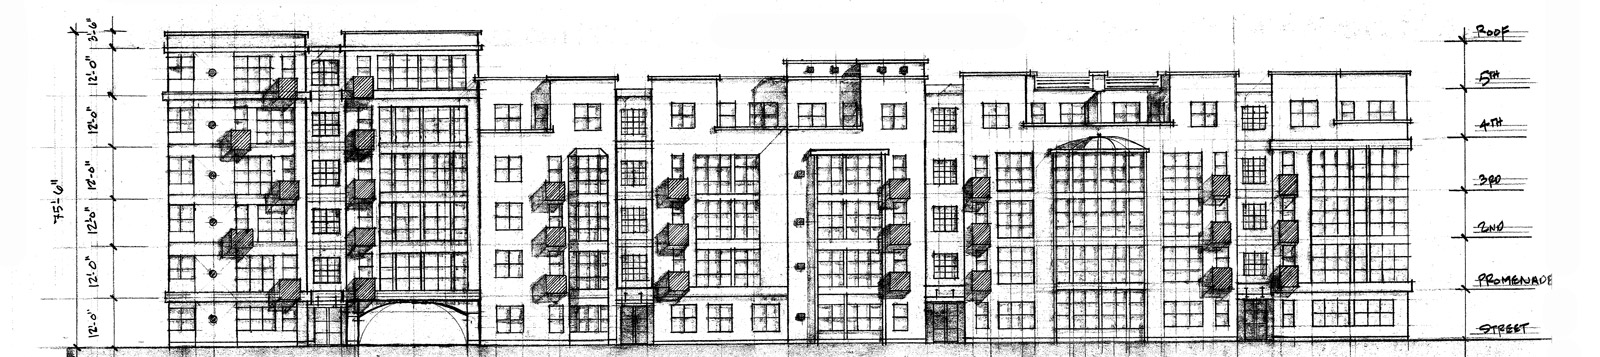 Row-Houses-Street-Elevation-Sketch--South-cropped